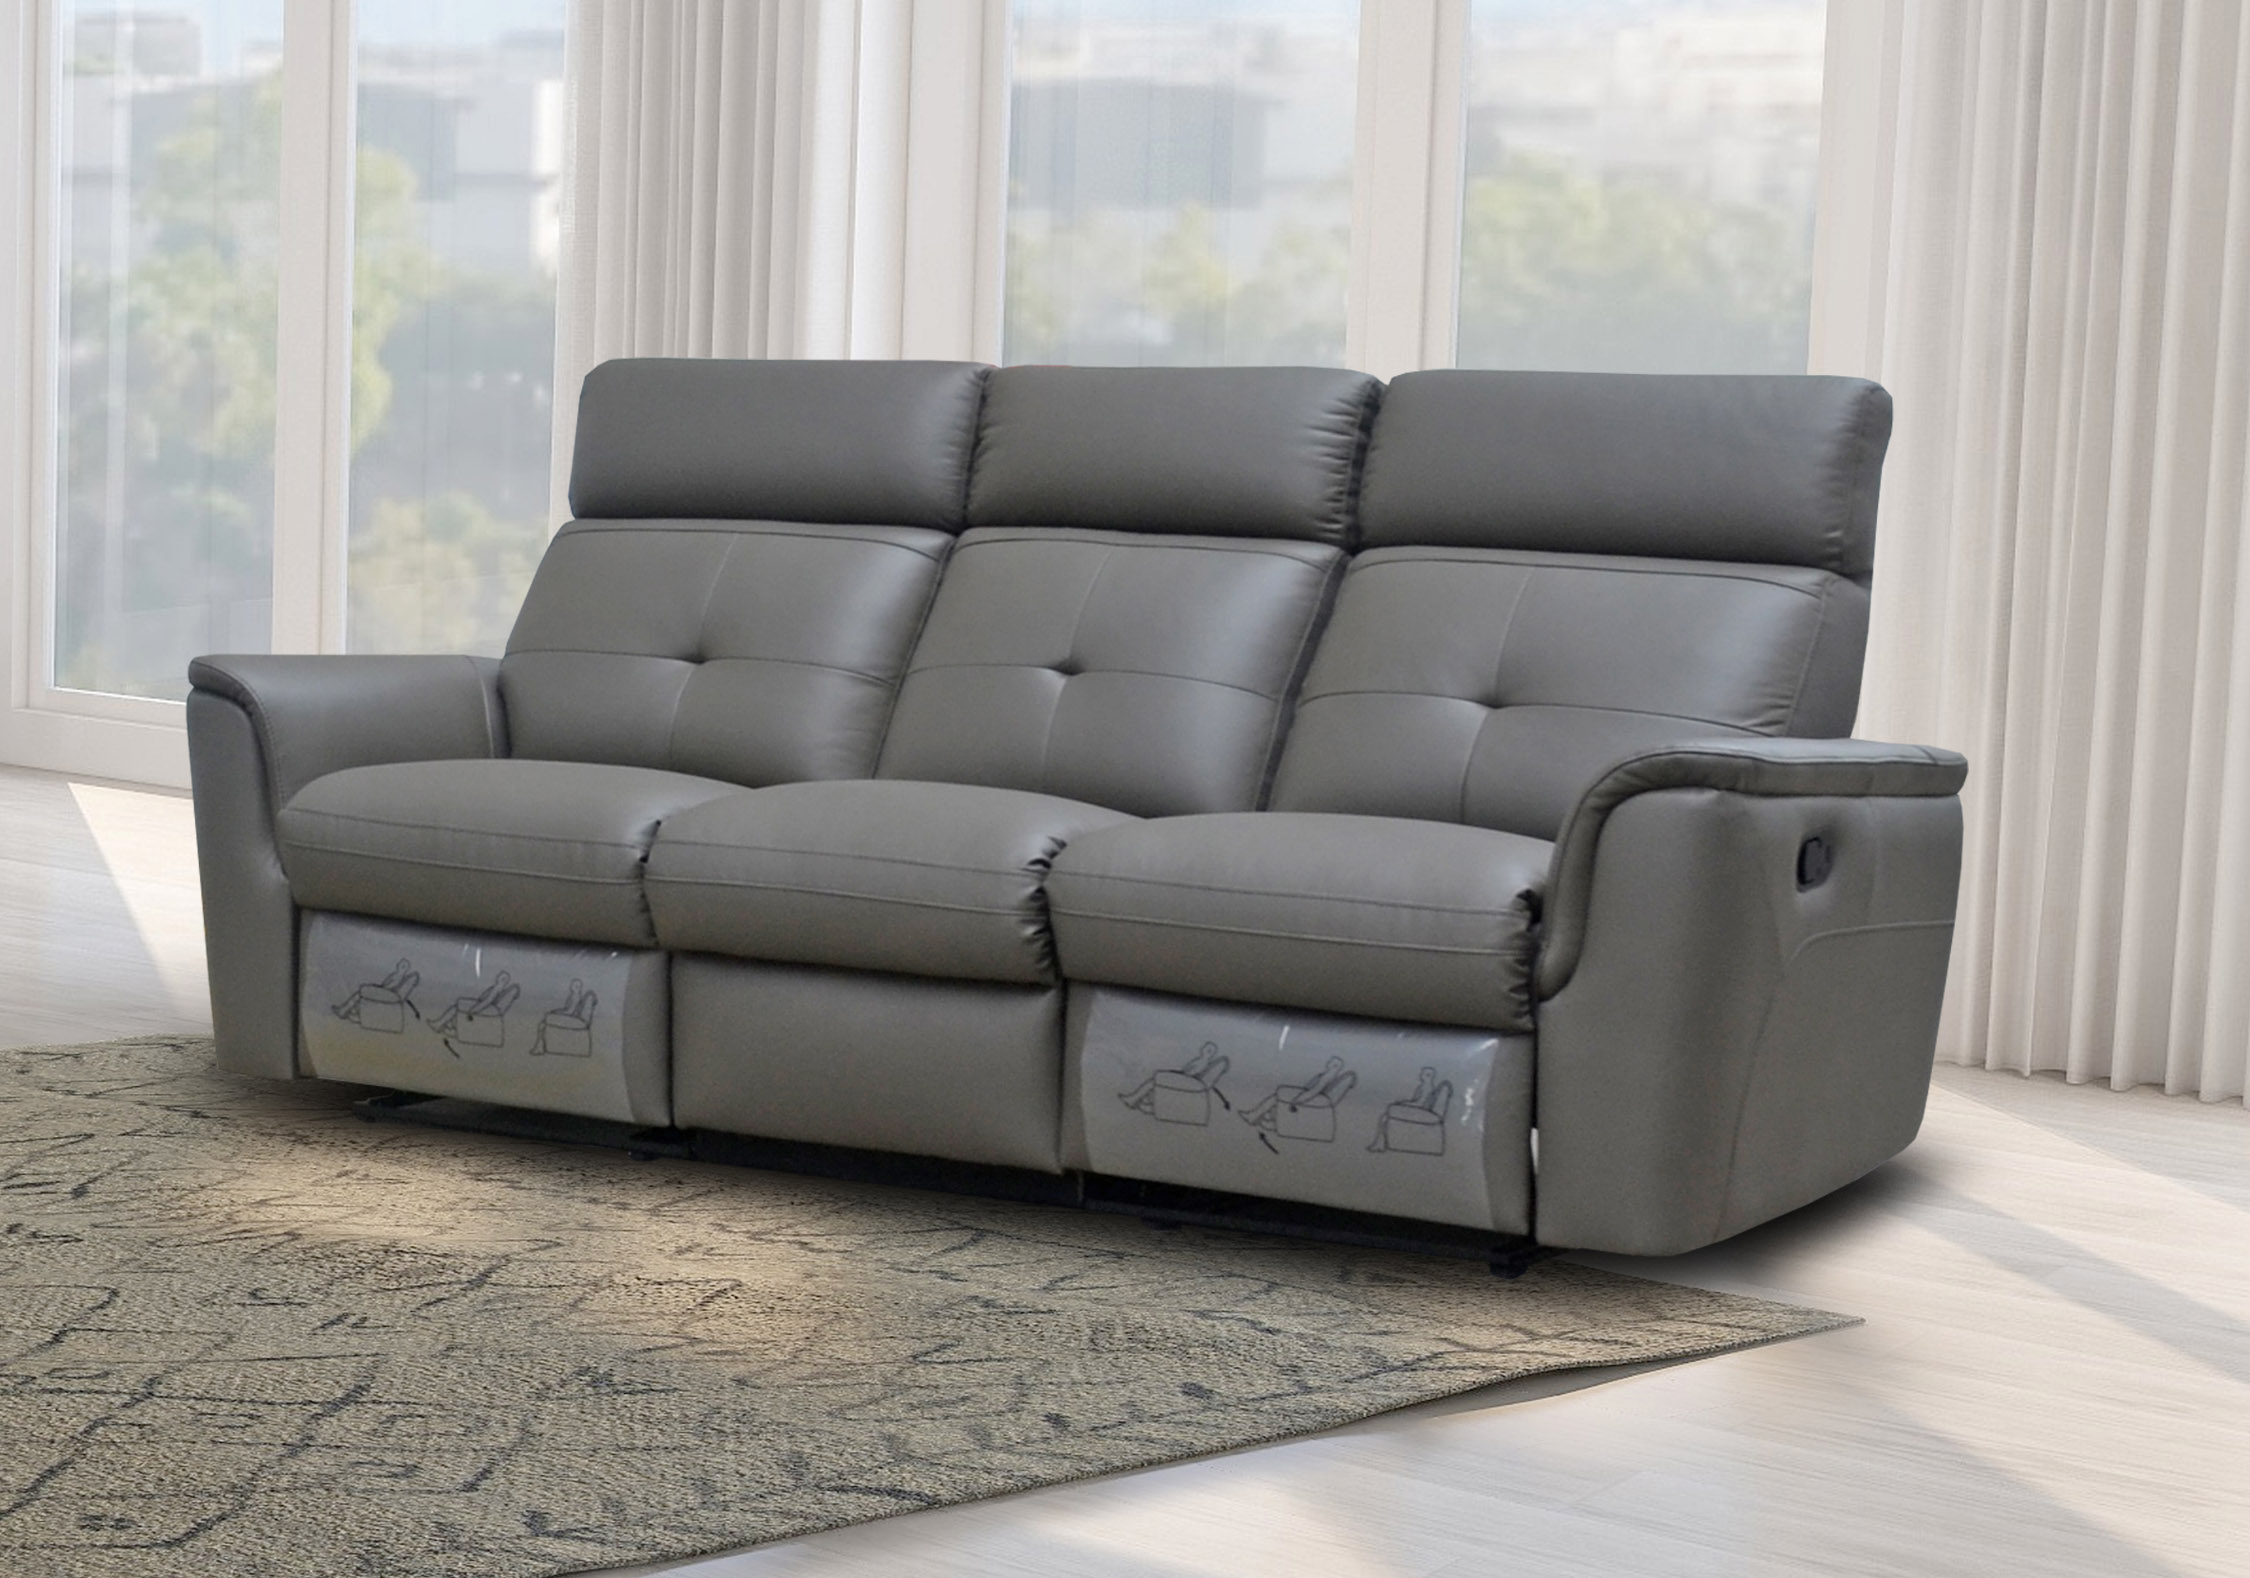 Contemporary Chic Leather Sofa Set